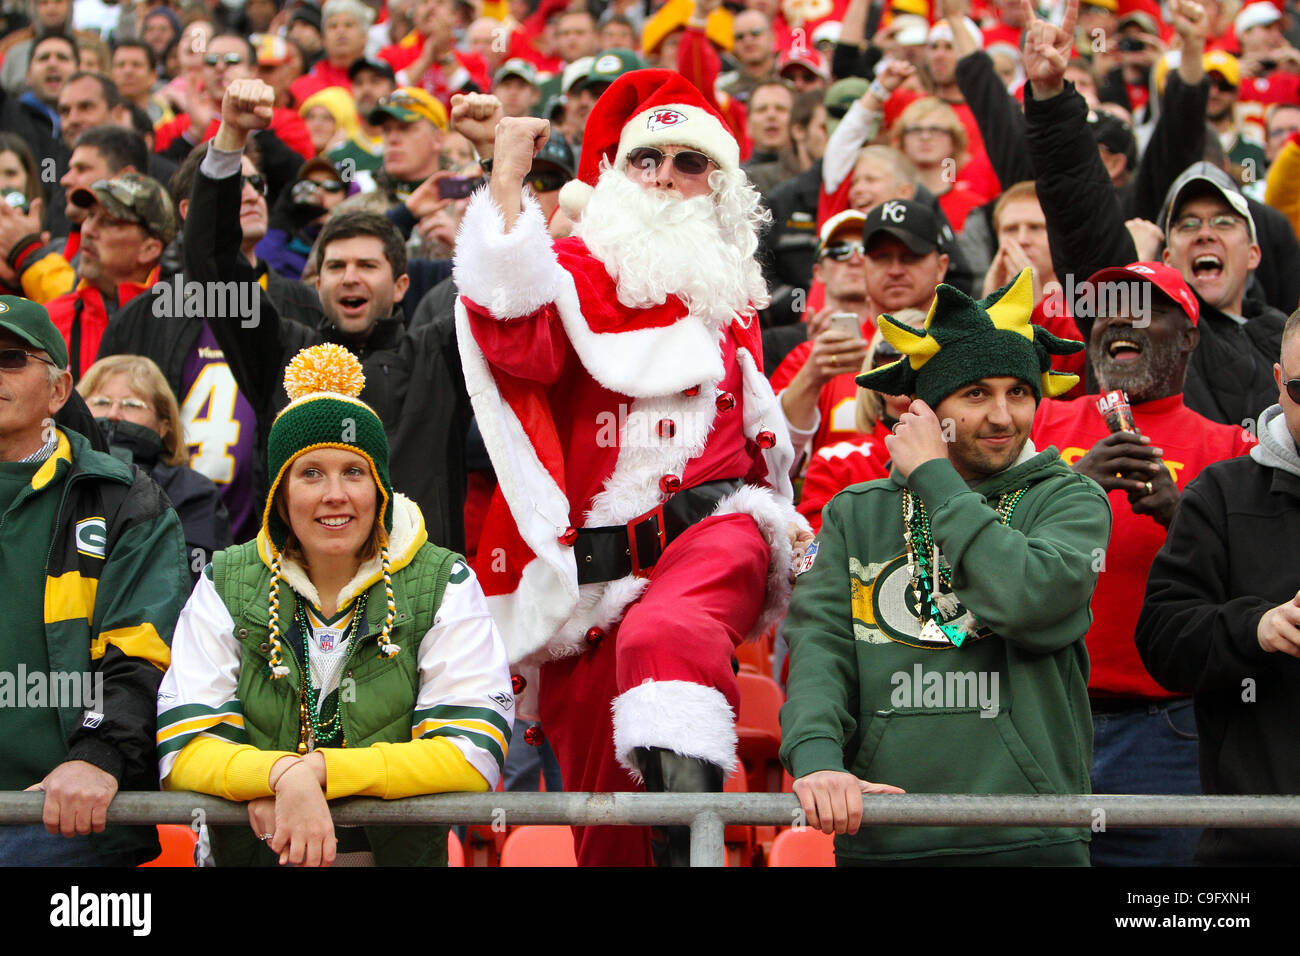 Dec. 18, 2011 - Kansas City, Missouri, United States of America - A Kansas City Chiefs fan dressed as Santa Clause celebrates the Chiefs' victory between two dejected Green Bay Packers fans. The Kansas City Chiefs defeat the Green Bay Packers 19-14 in the game at Arrowhead Stadium. (Credit Image: ©  Stock Photo